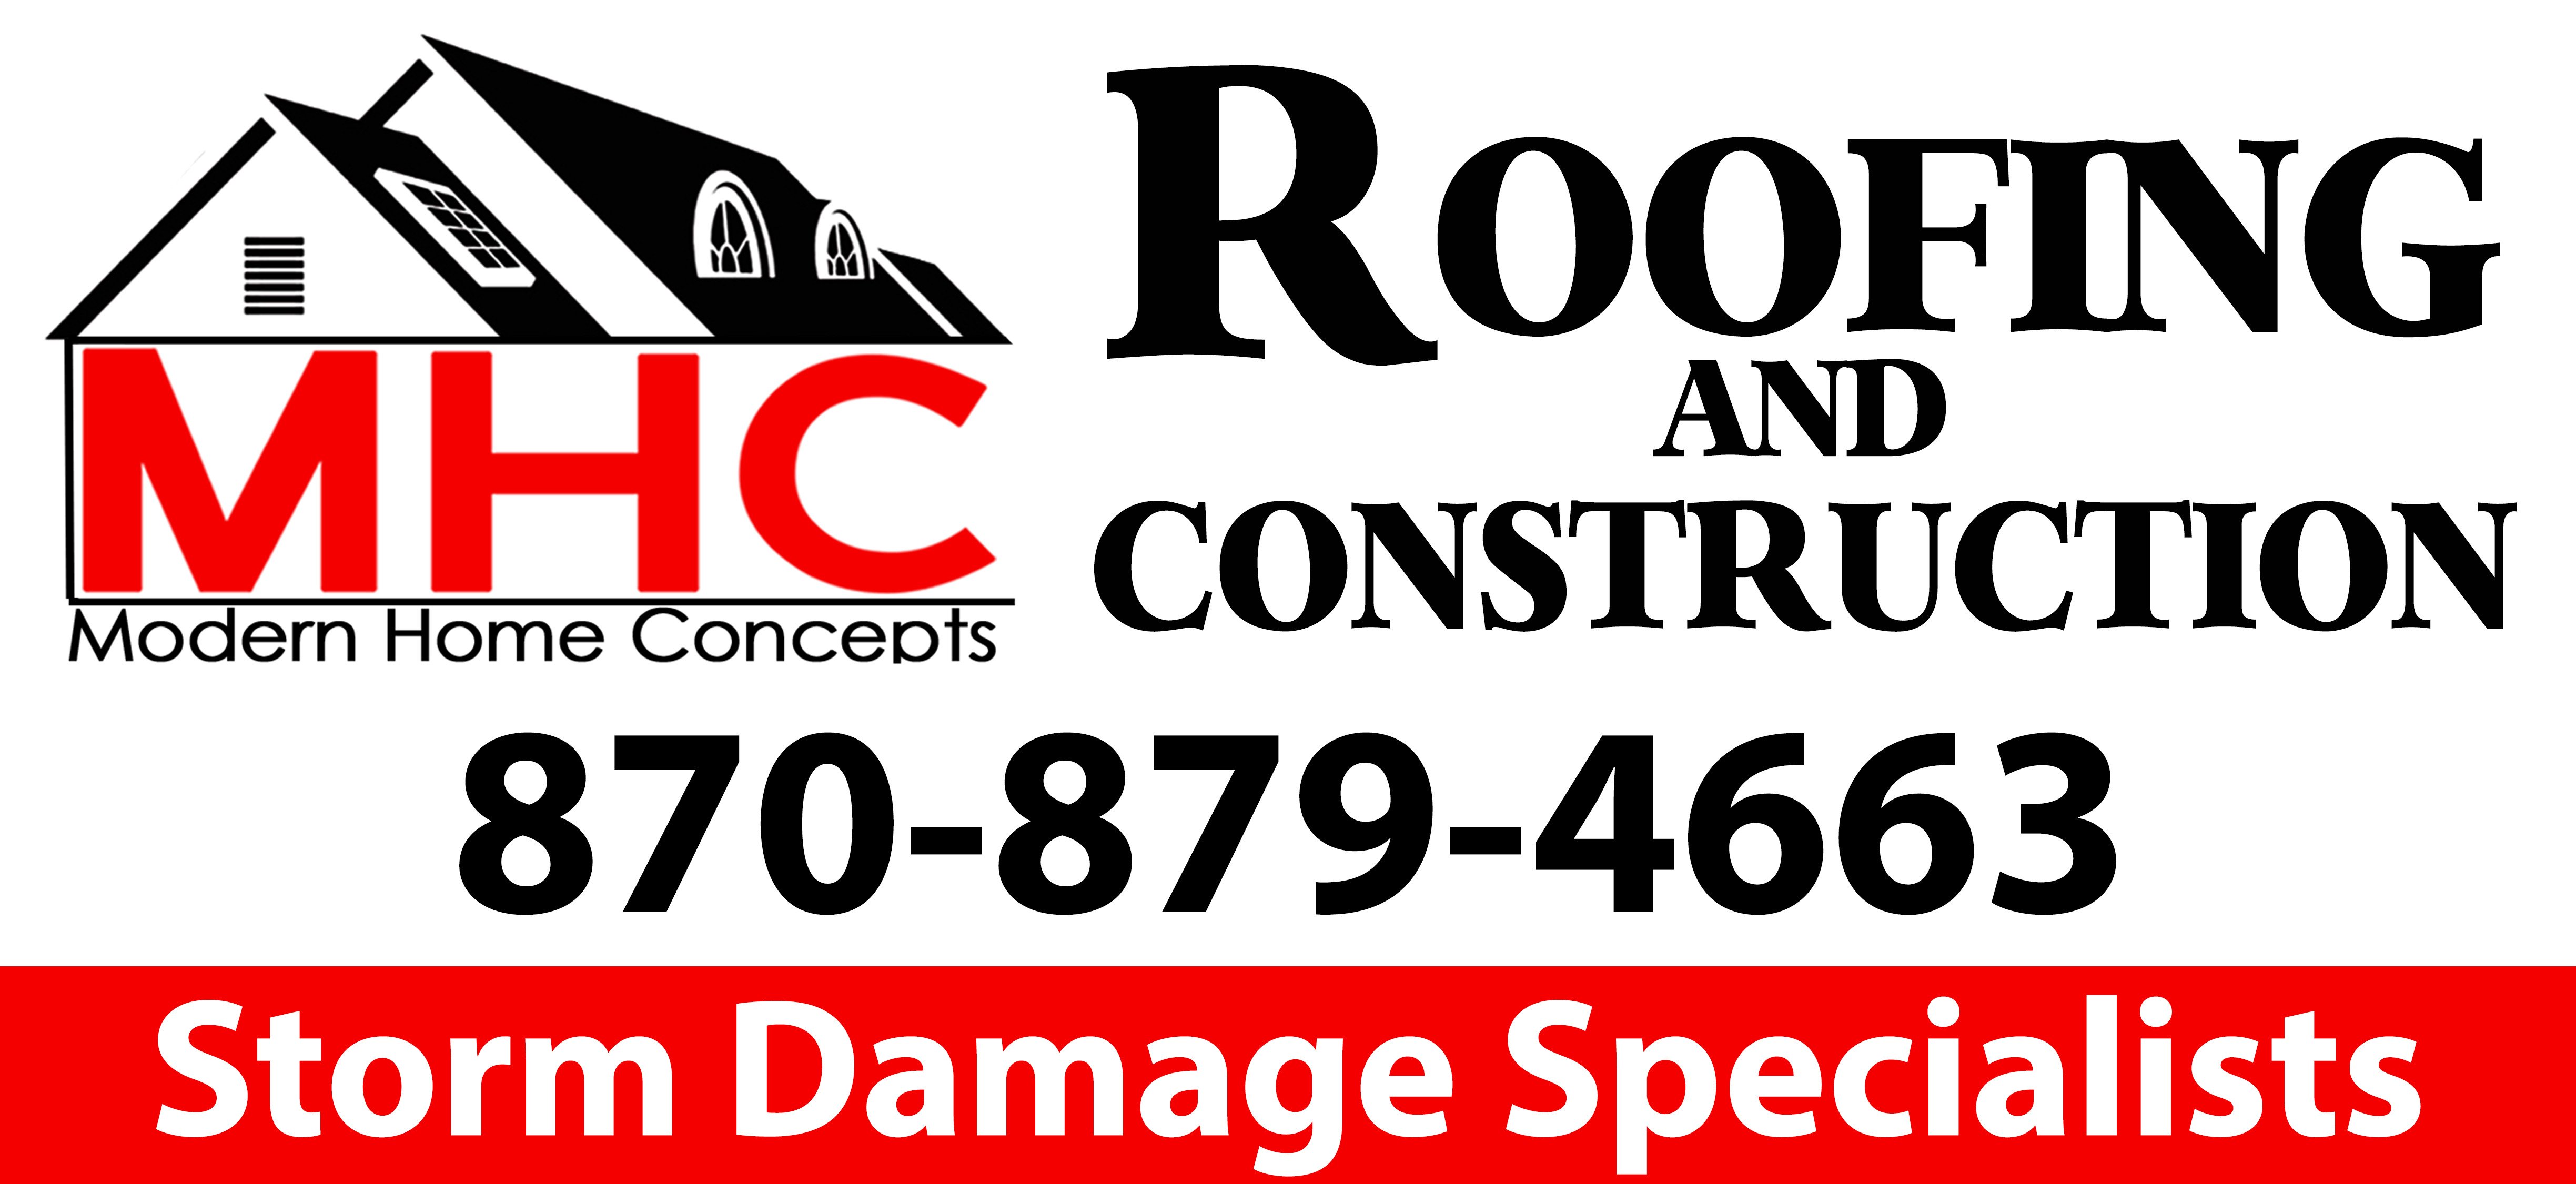 MHC Roofing and Construction, Inc. Logo